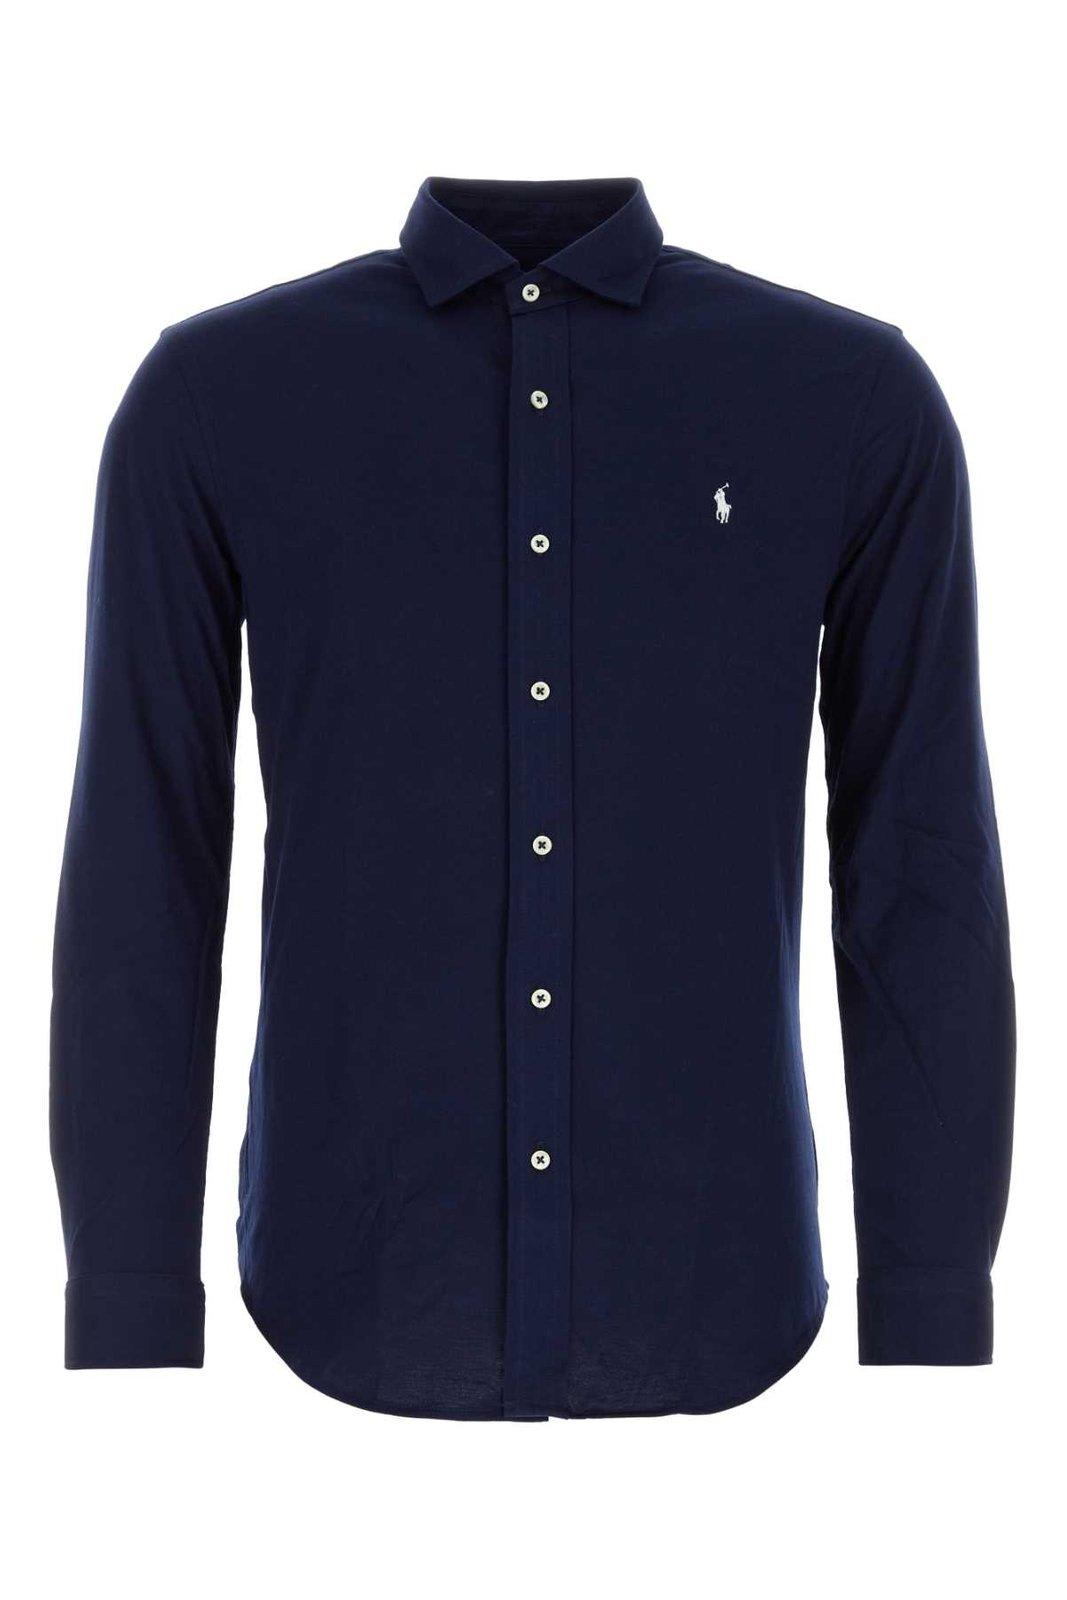 POLO RALPH LAUREN POLO PONY EMBROIDERED BUTTONED SHIRT